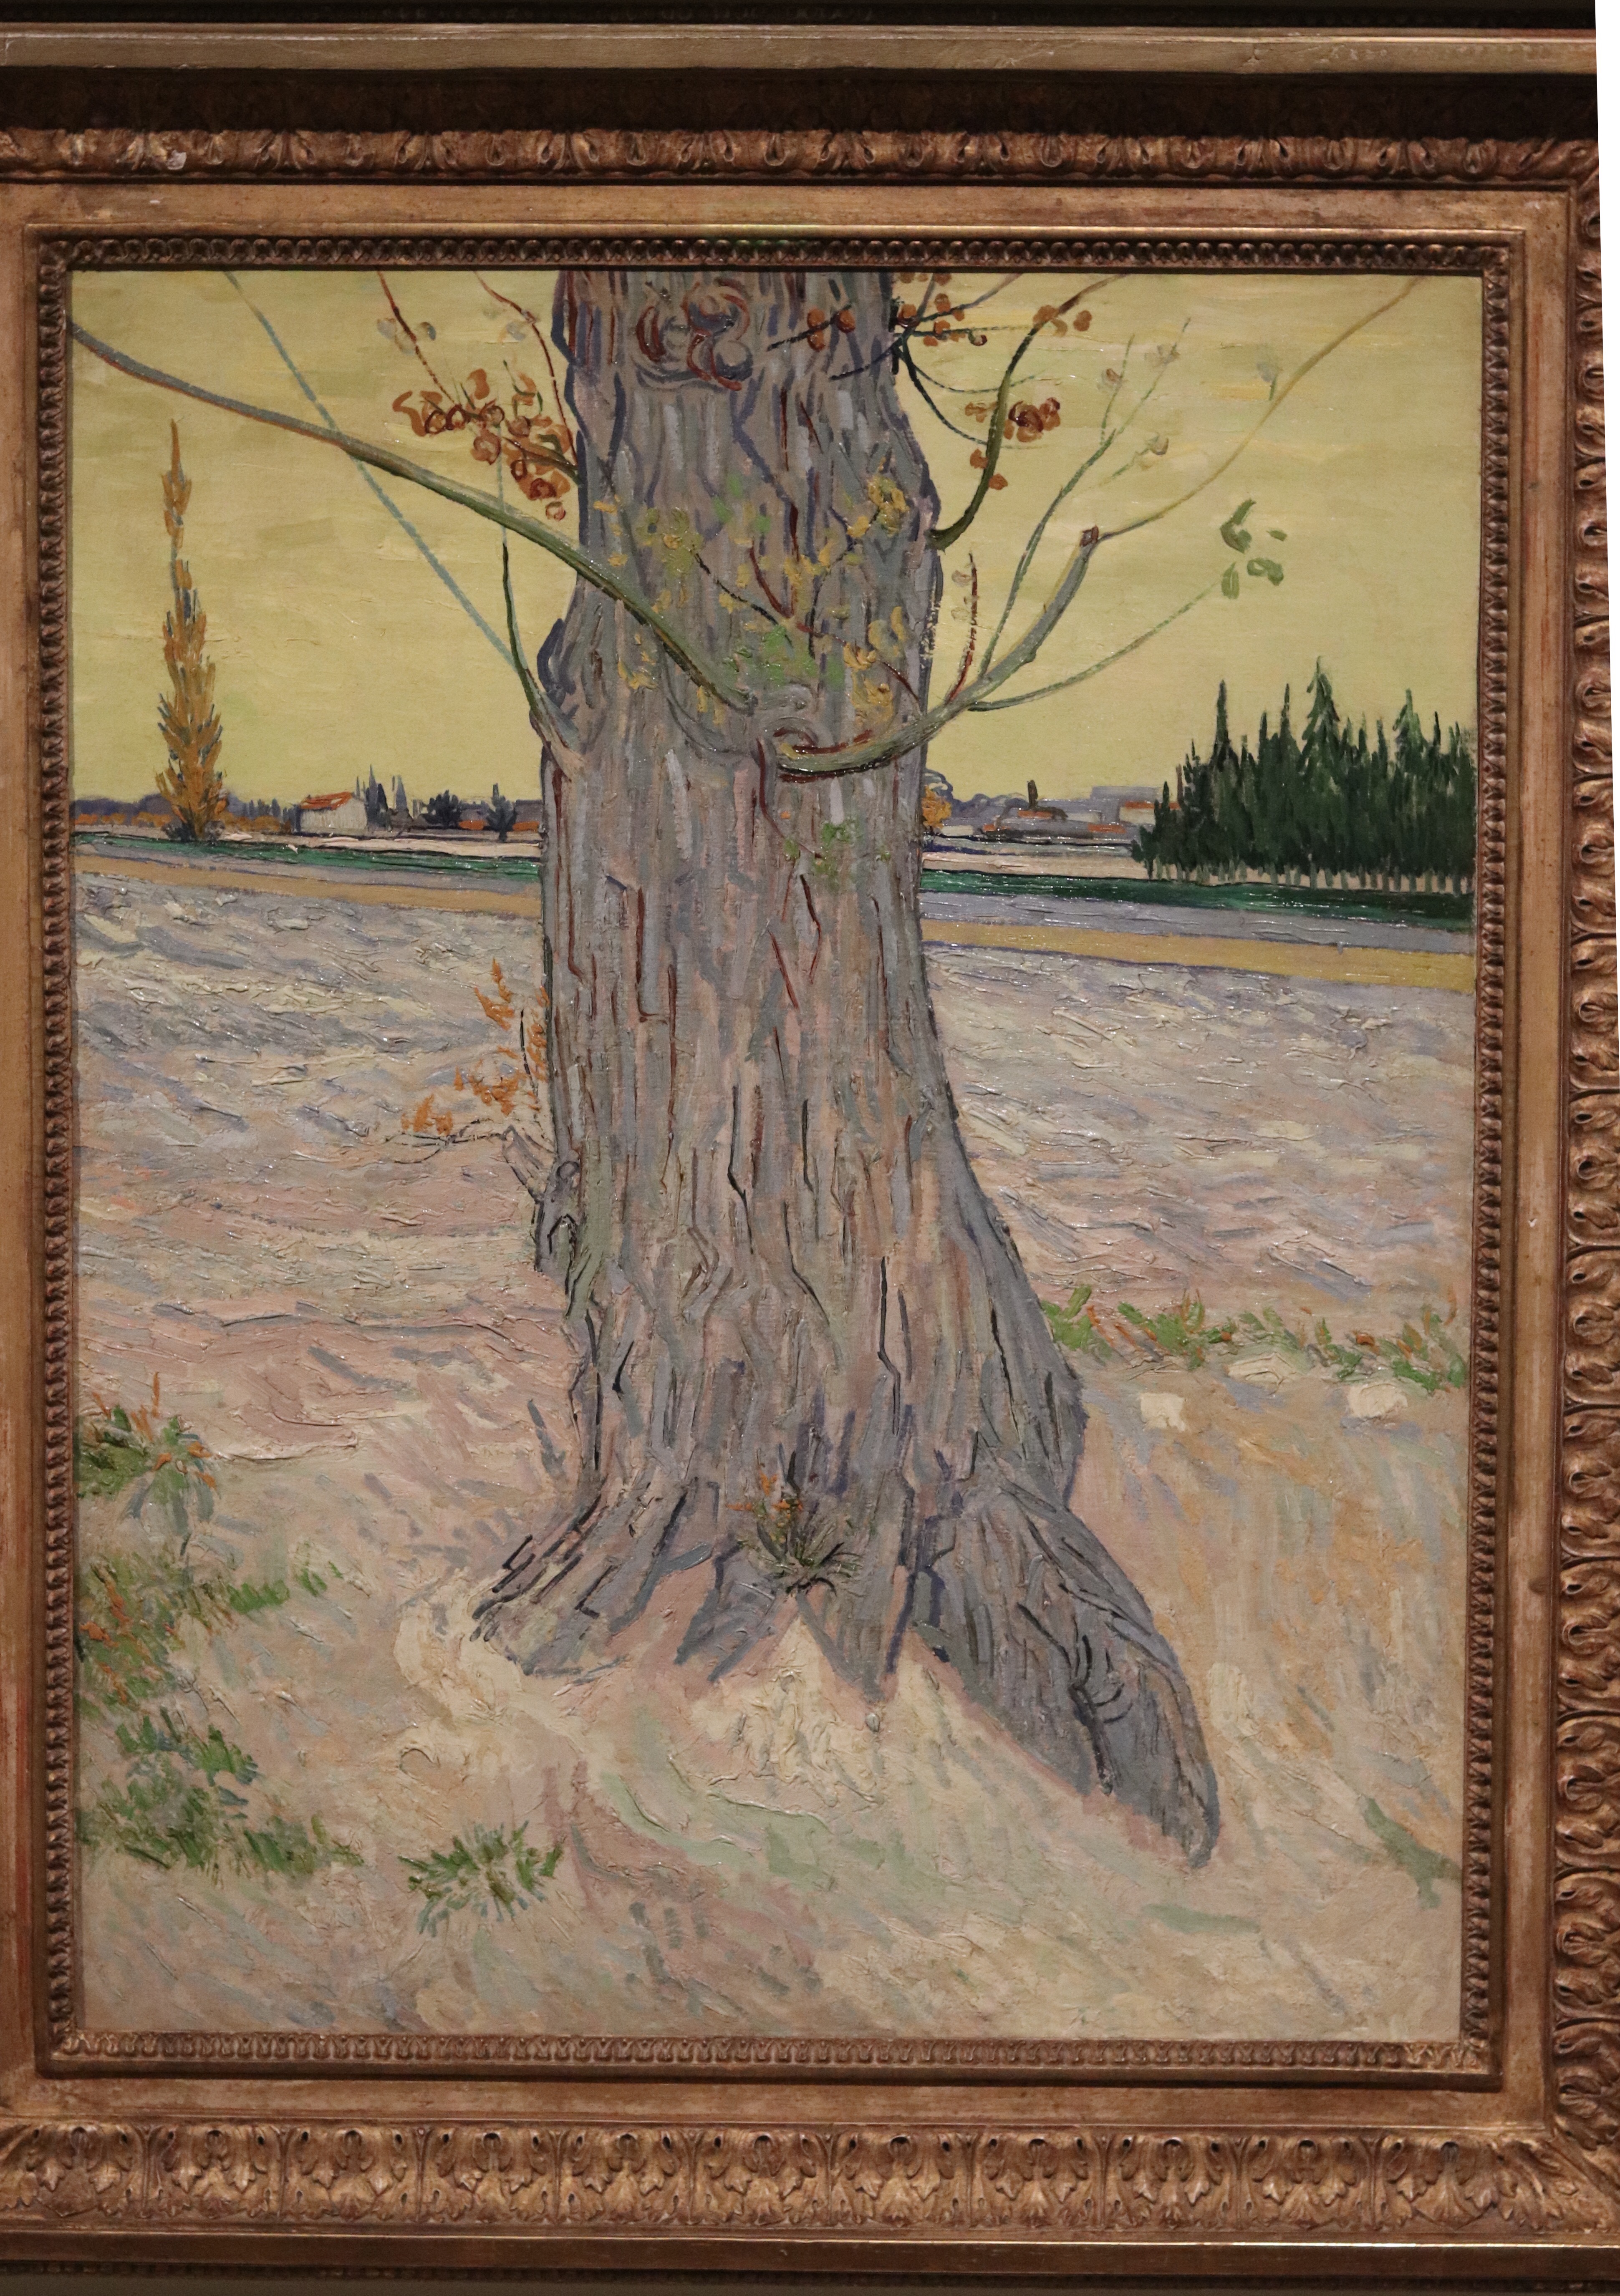 ‘Trunk of an Old Yew Tree’, Vincent van Gogh, 1888. Private collection